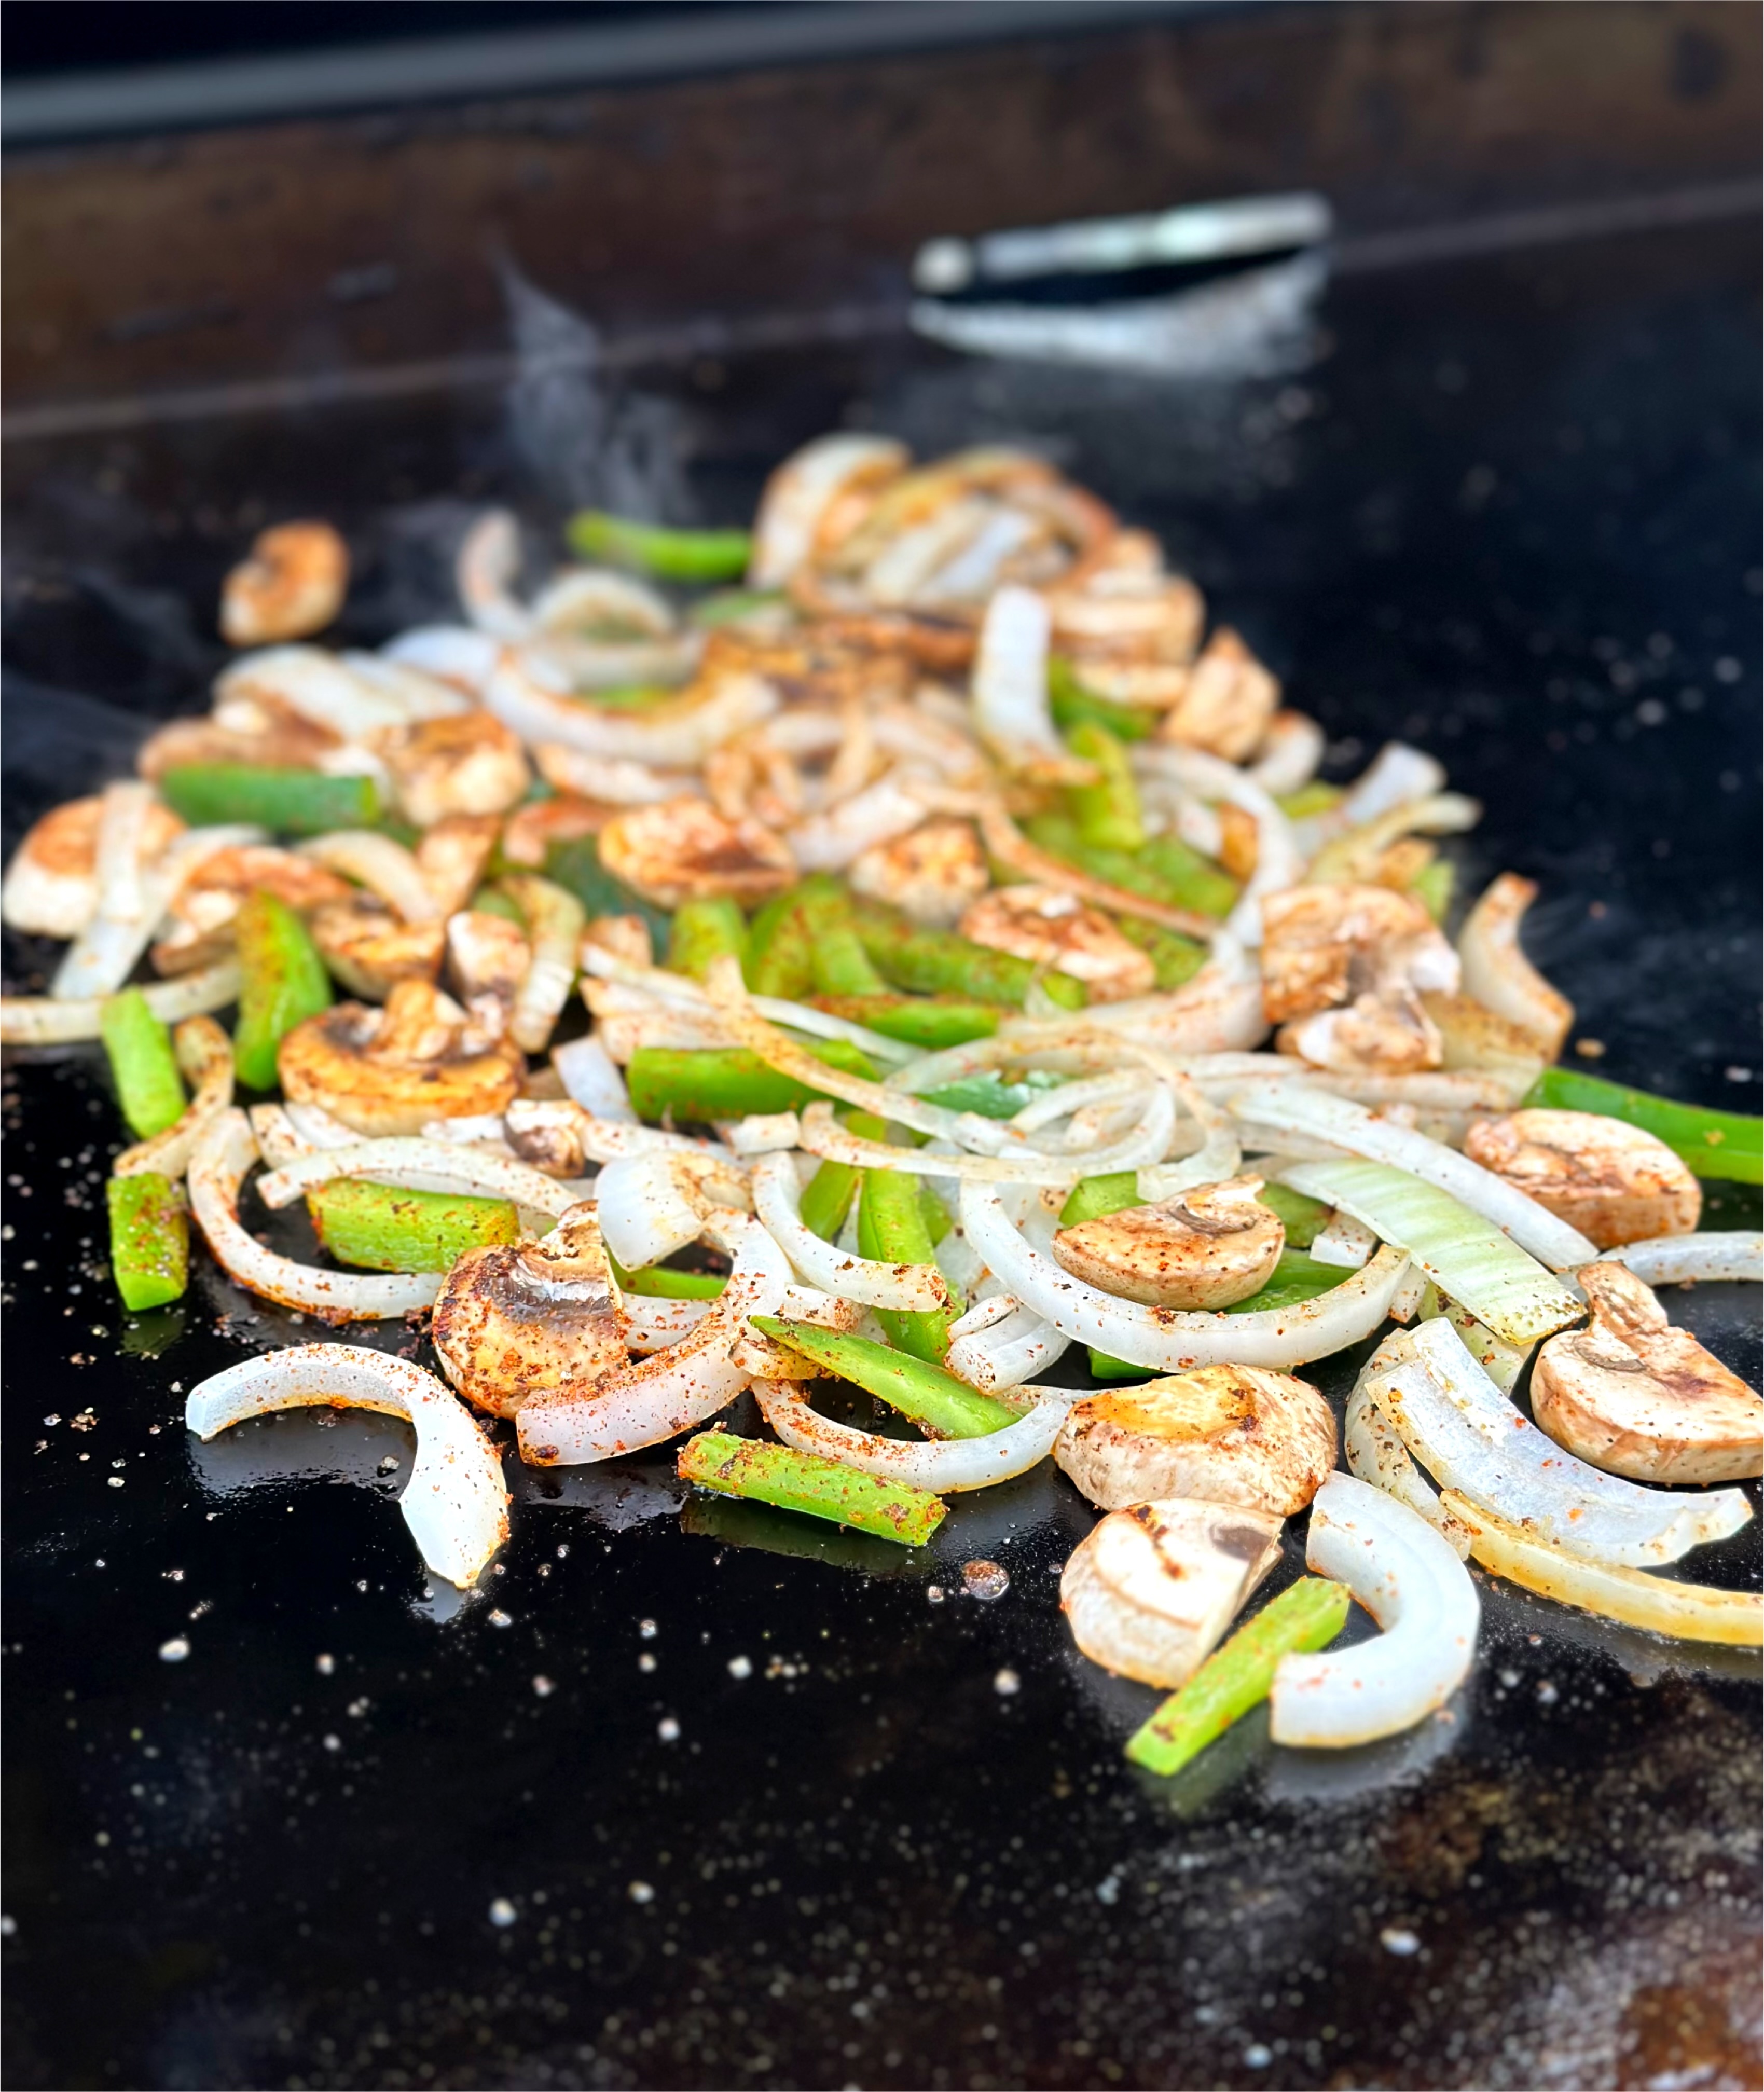 Onions, bell peppers, and mushrooms seasoned and cooking on the griddle. 